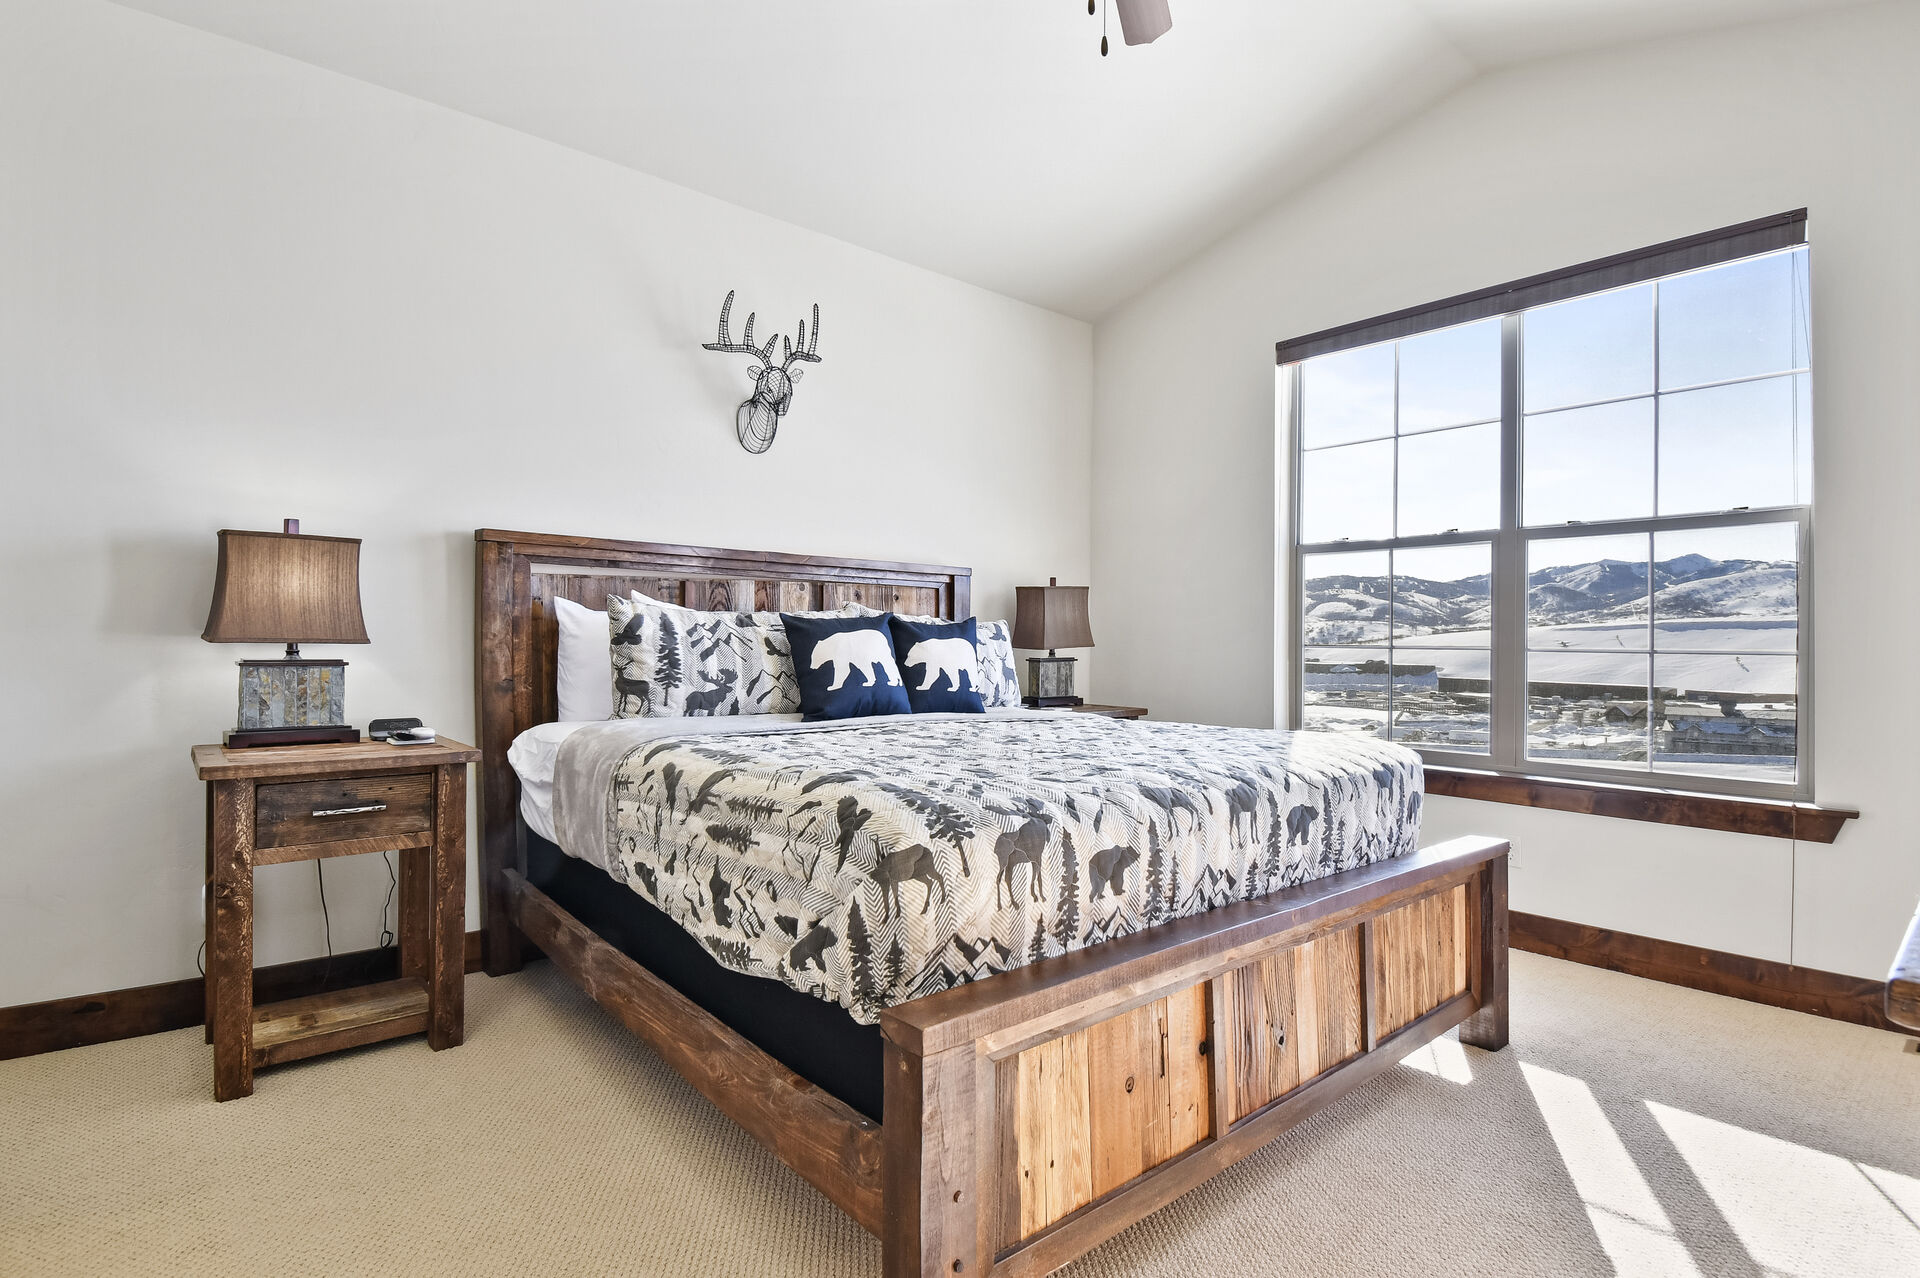 Master bedroom with views of the mountains